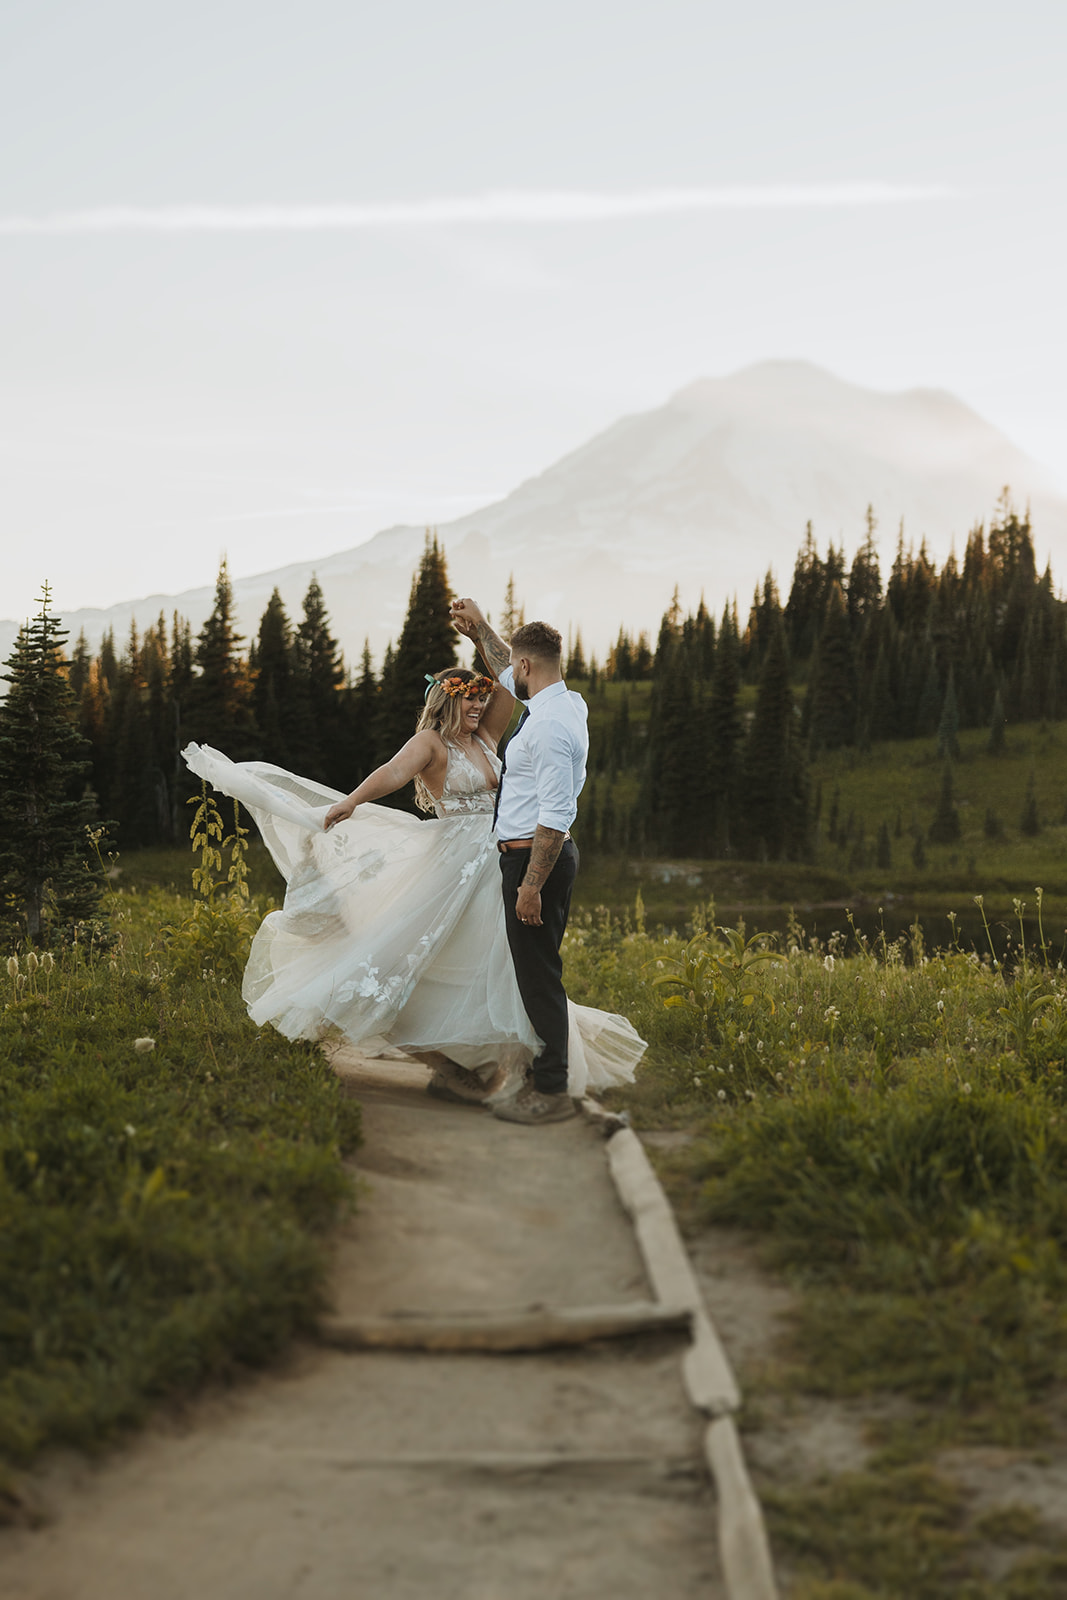 How To Choose The Perfect Elopement Wedding Dress